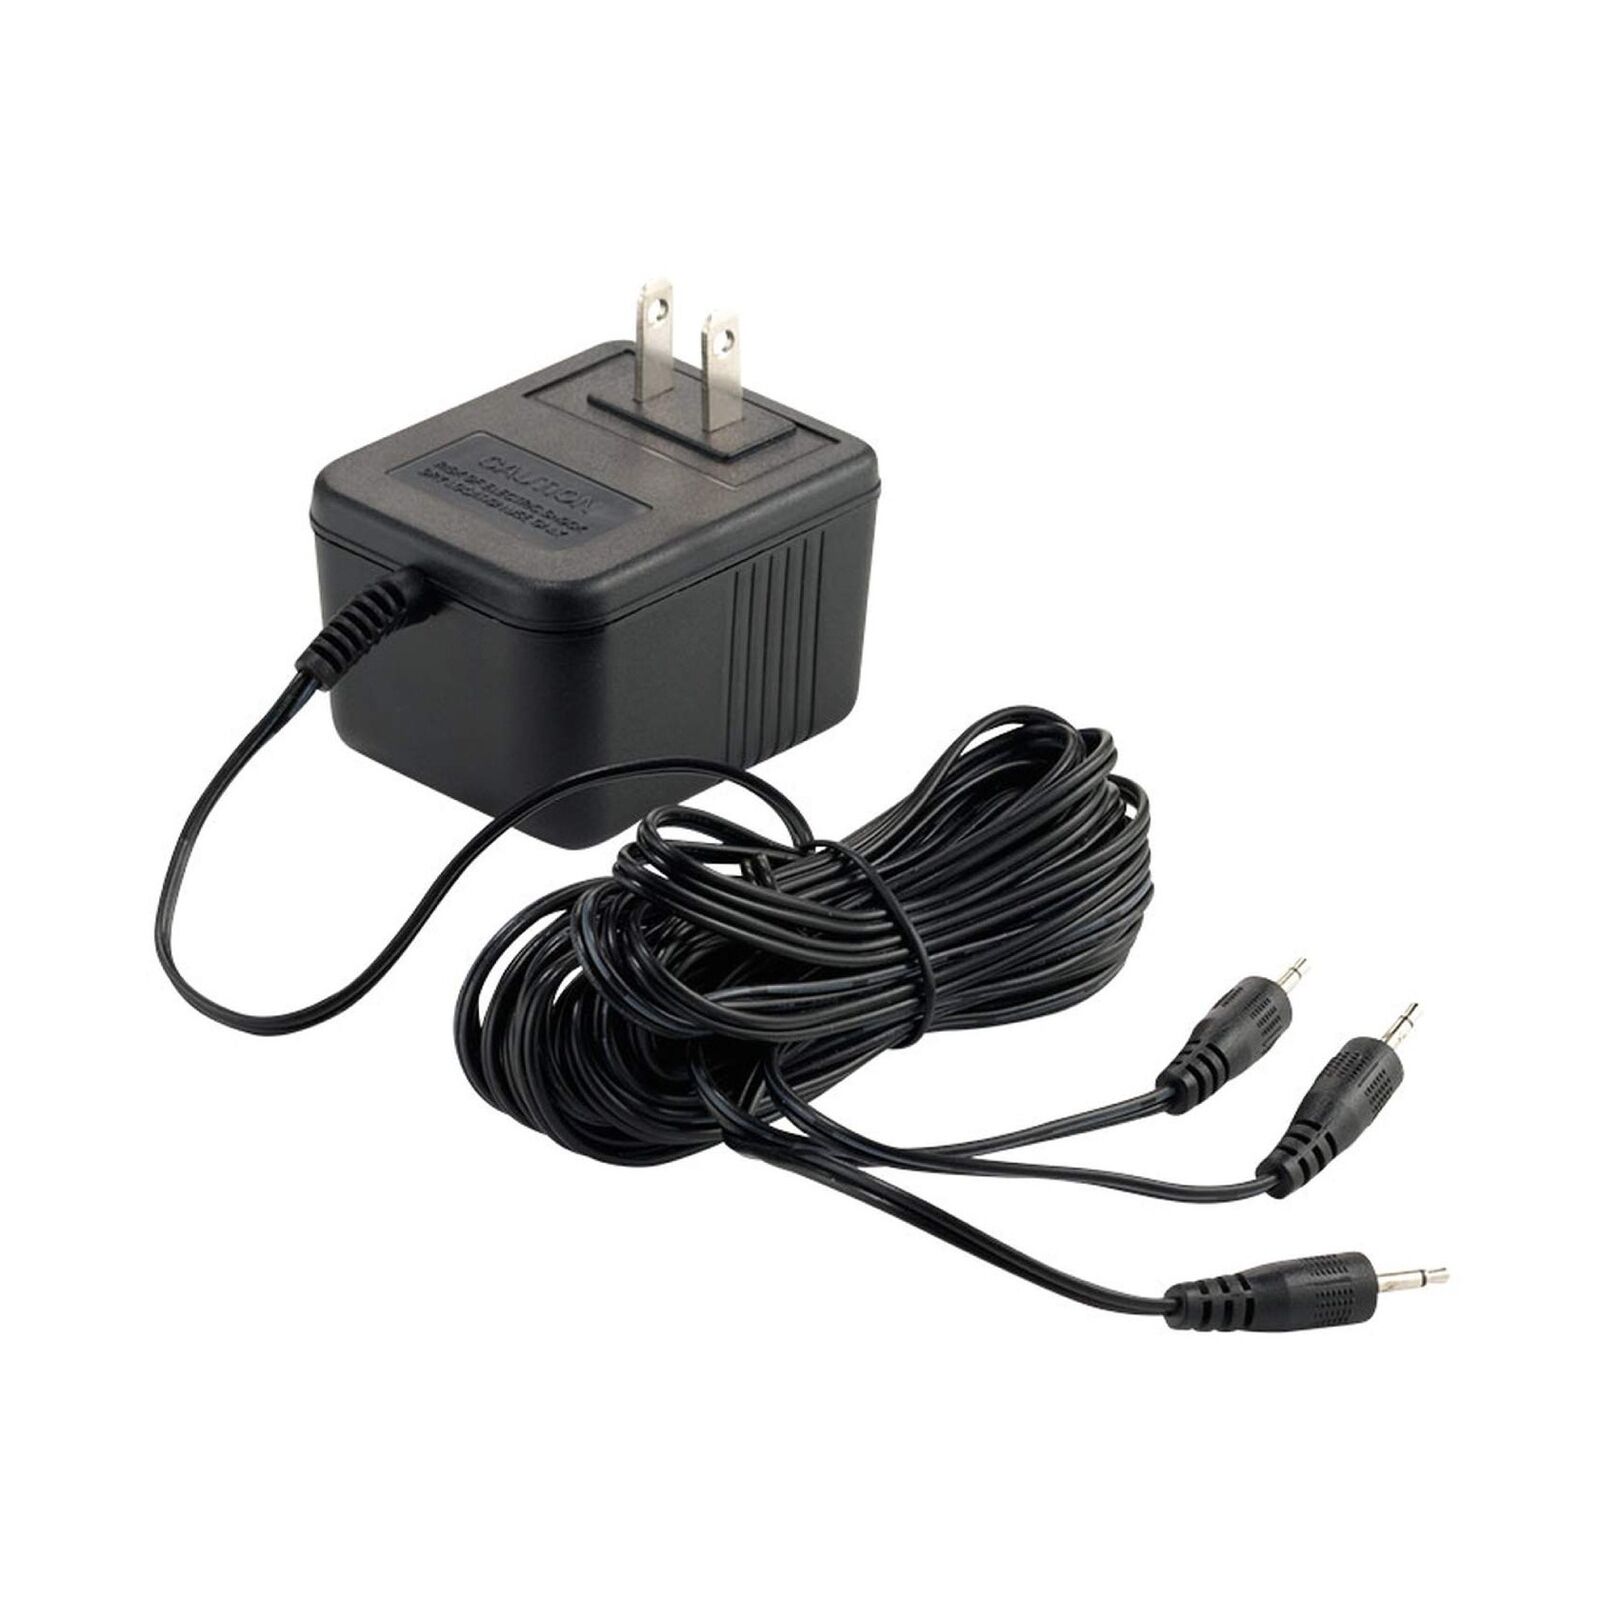 Department 56 Accessories for Village Collections AC/DC Power Adapter, 3.15 I. Brand Does not apply MPN 4035316 UPC 045 - Click Image to Close